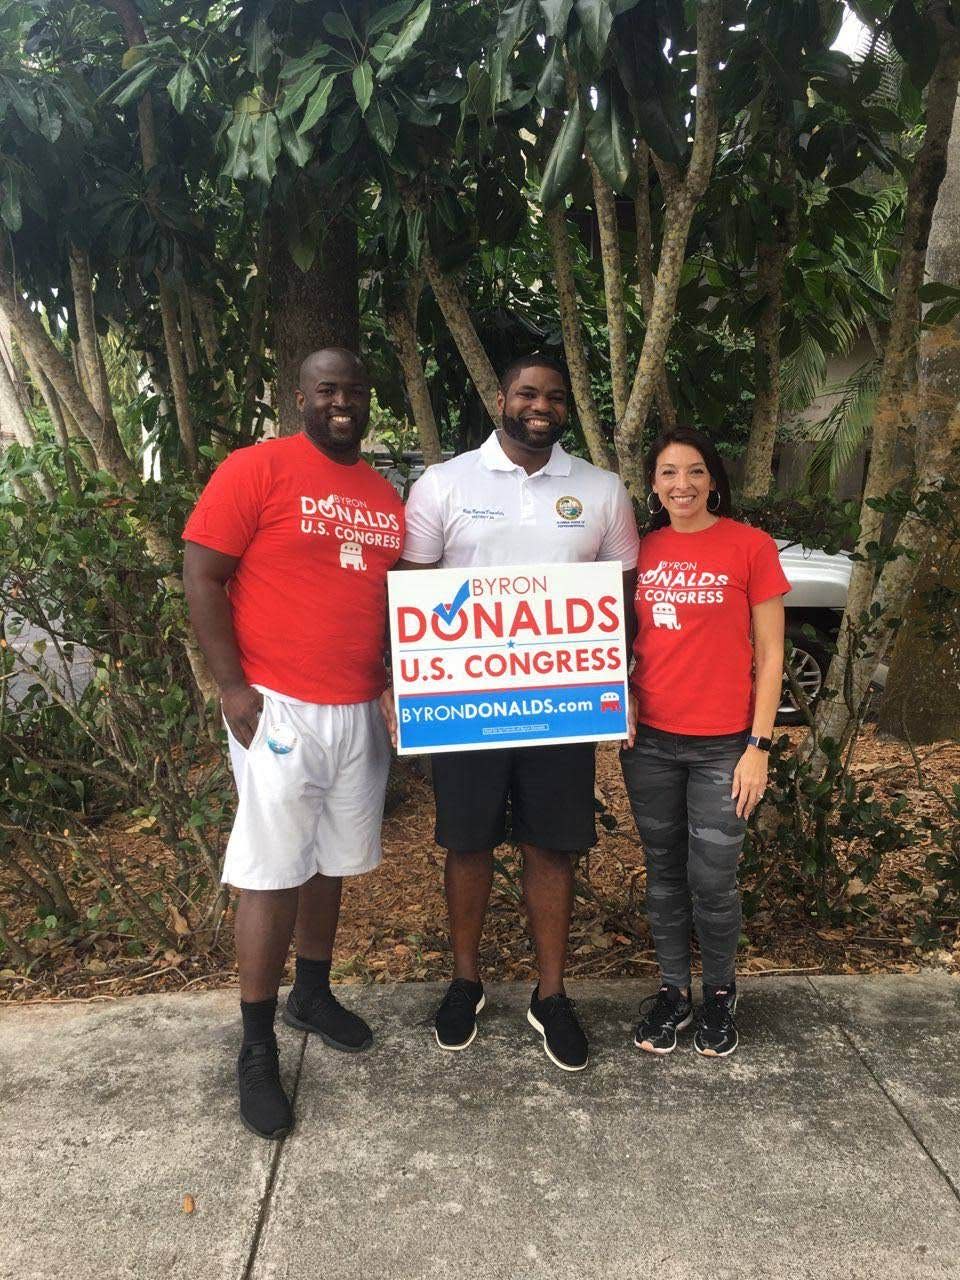 Larry Wilcoxson, left, campaigns with his friend Byron Donalds, now a U.S. Representative from Naples, Florida. Wilcoxson's political dreams were on hold for more than seven years after he was wrongfully convicted of stealing a car from Hertz. His conviction was overturned in January and he works as a senior advisor for Donalds.